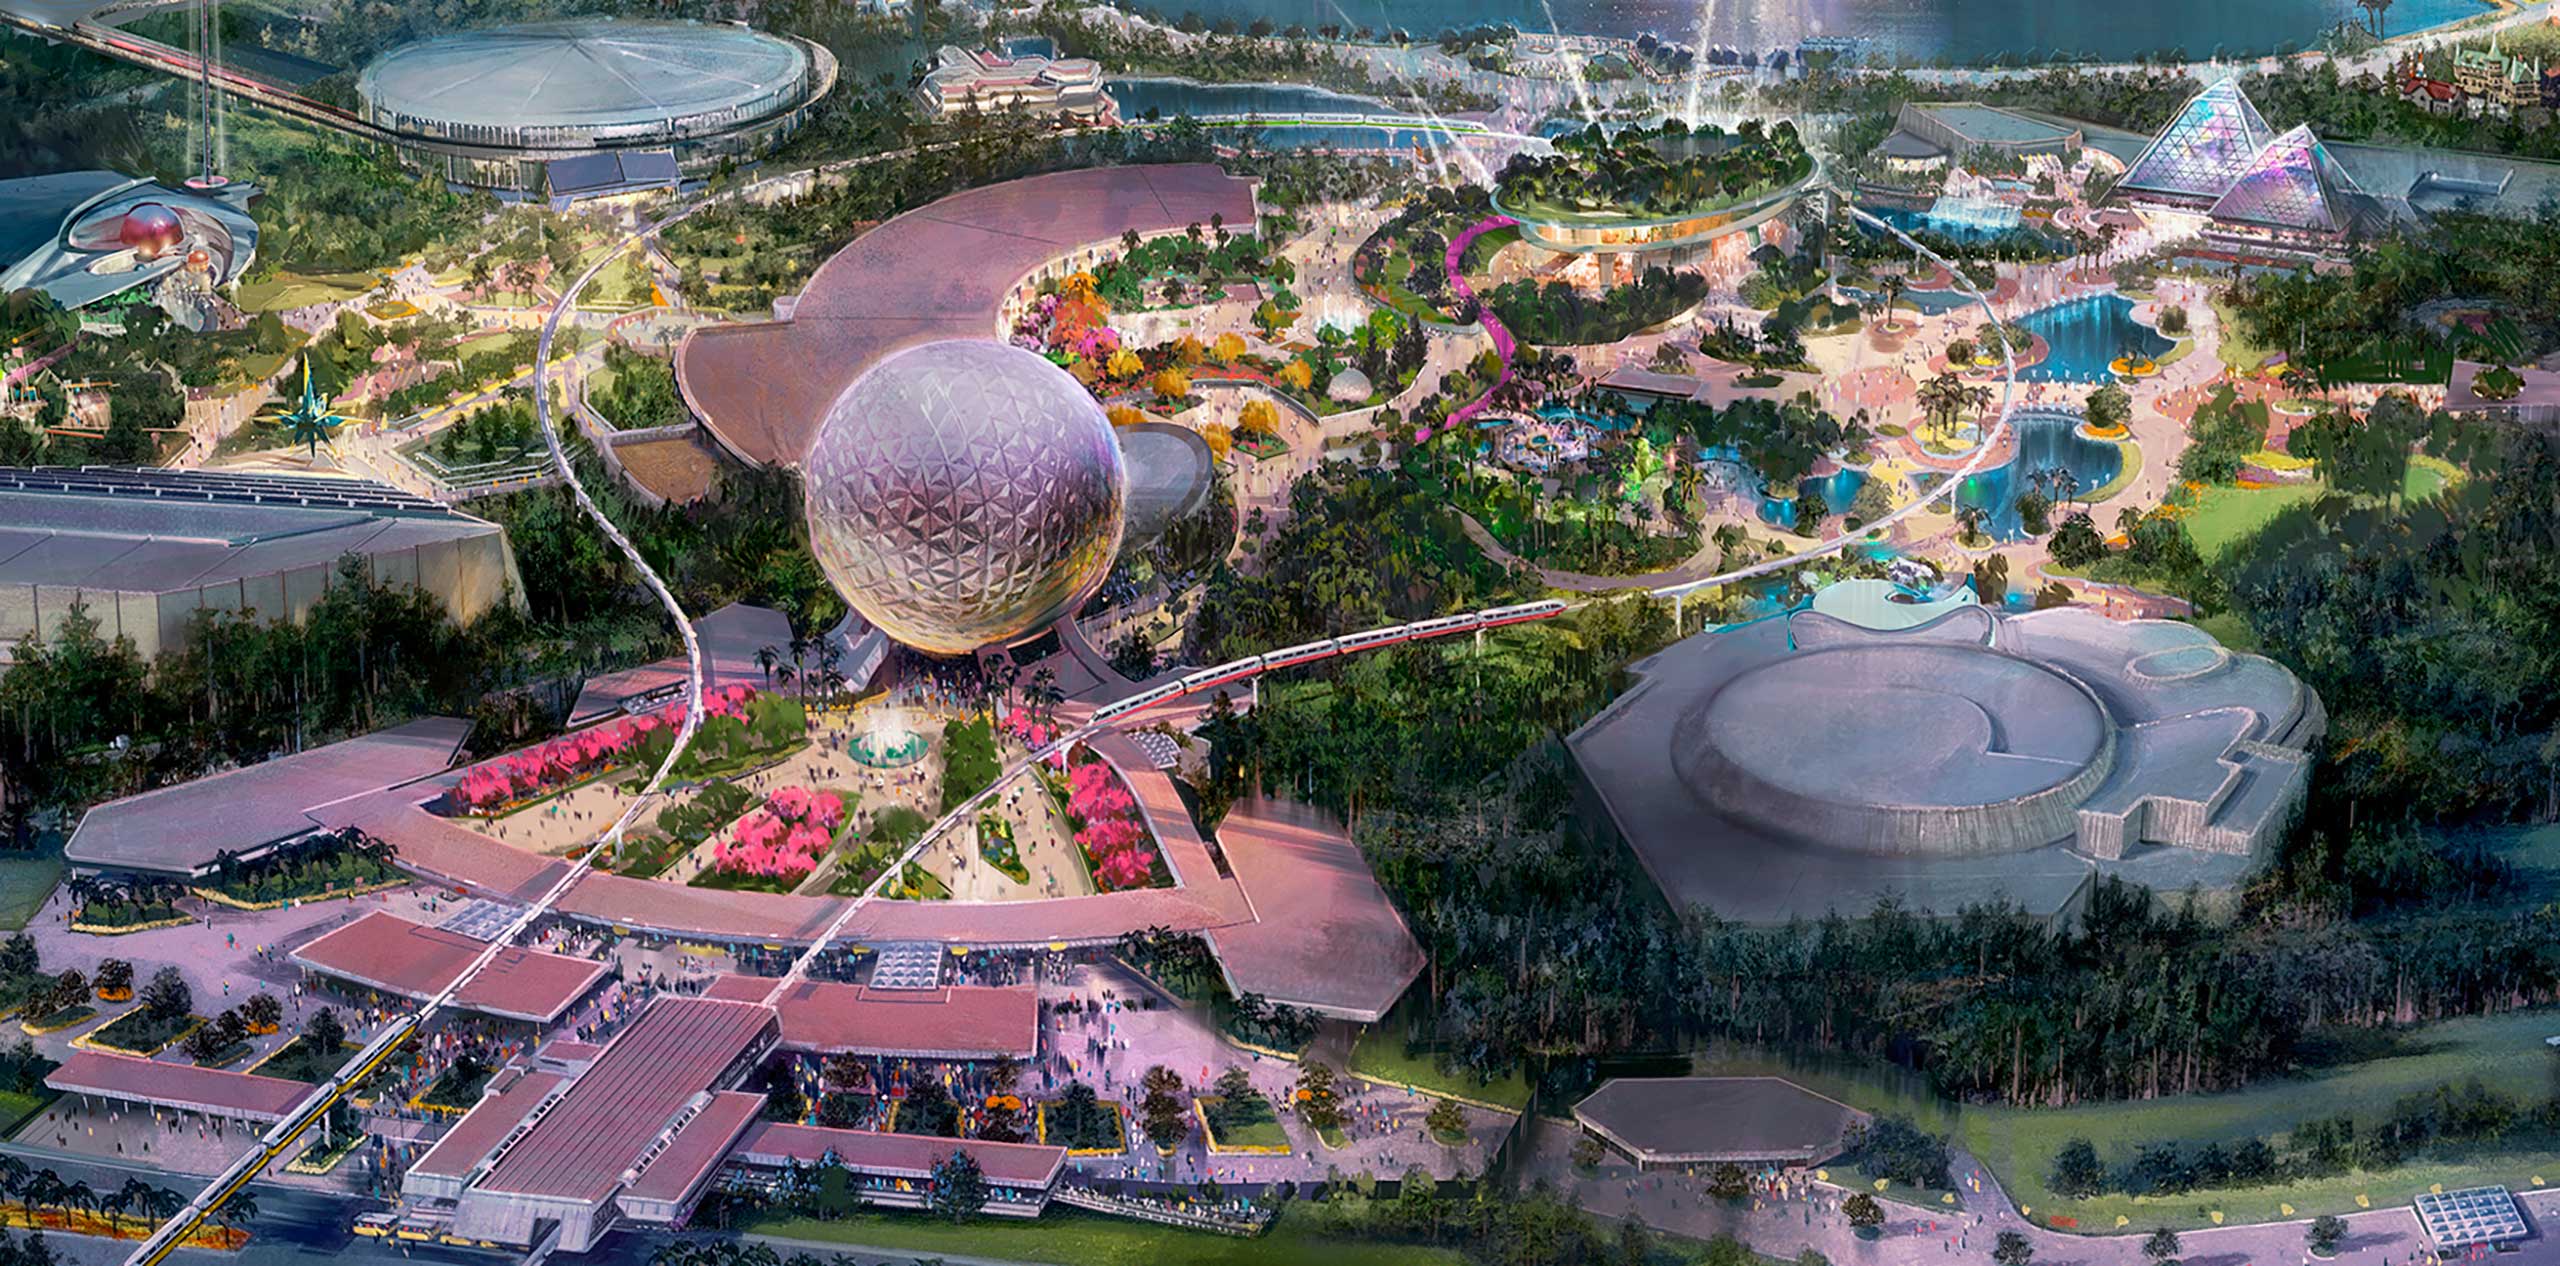 PHOTOS Epcot's new central spine design revealed in new concept art